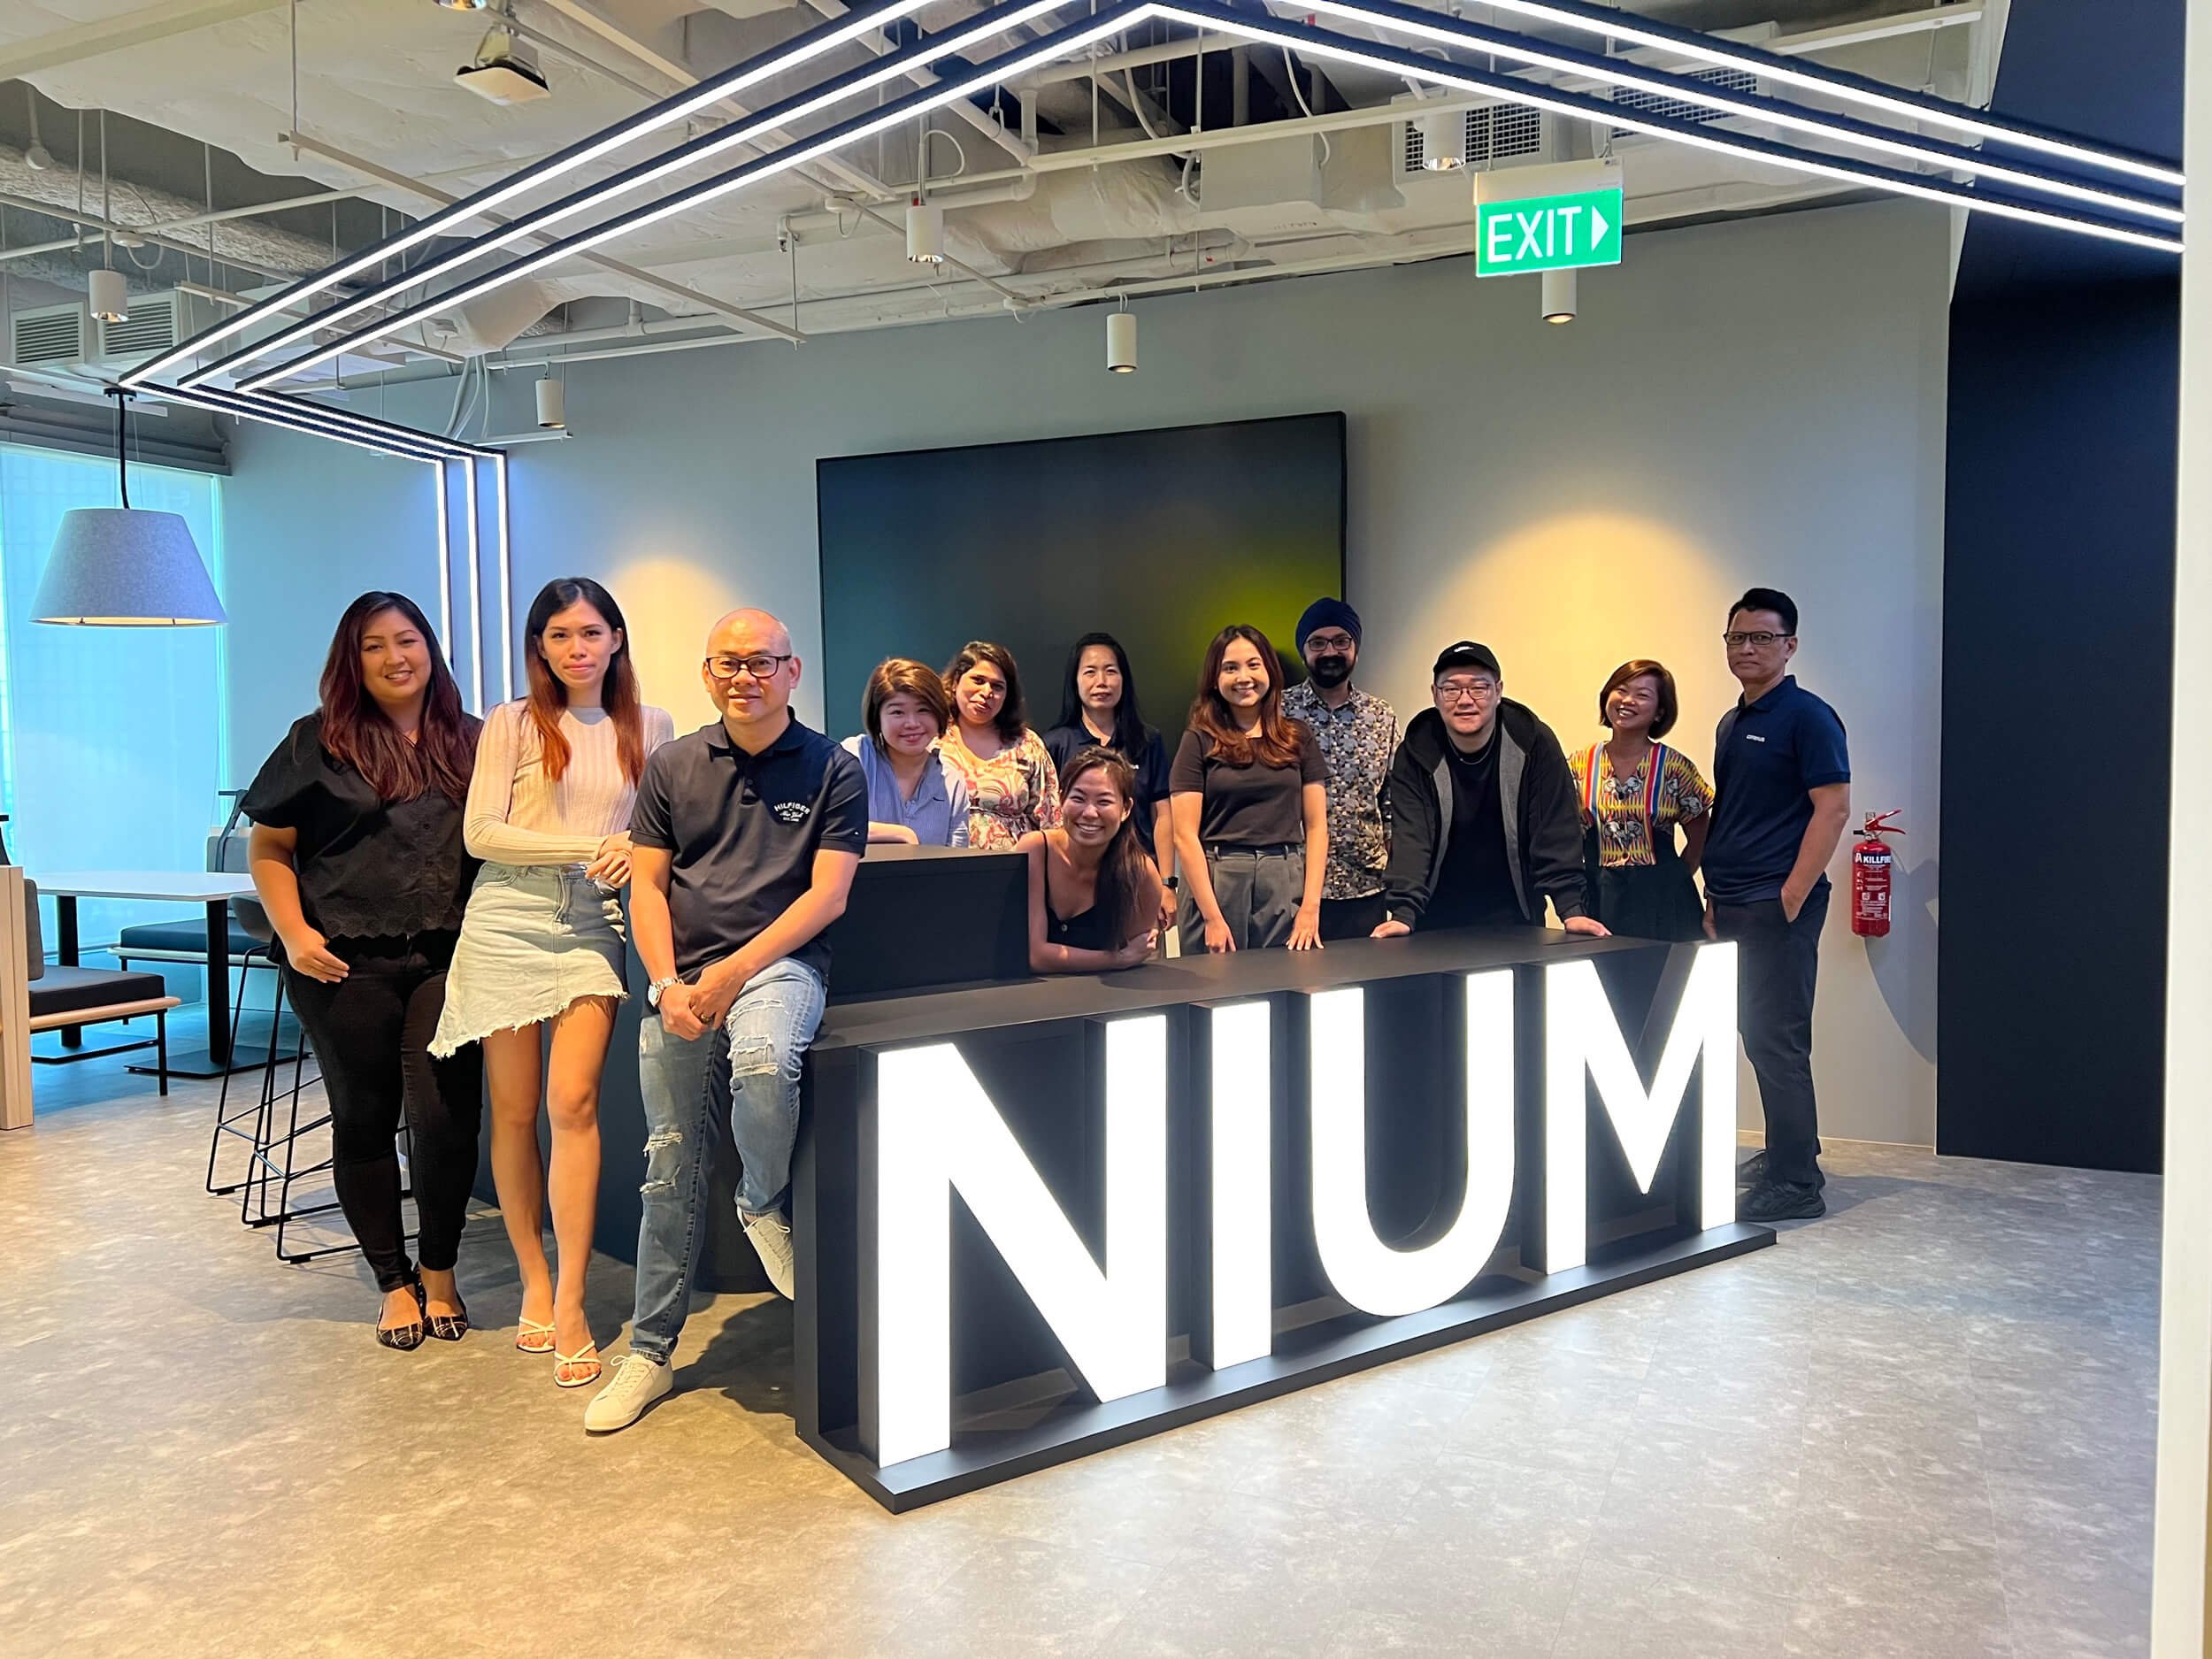  The Nium and Conexus Studio teams commemorating the project’s completion with a group photo  